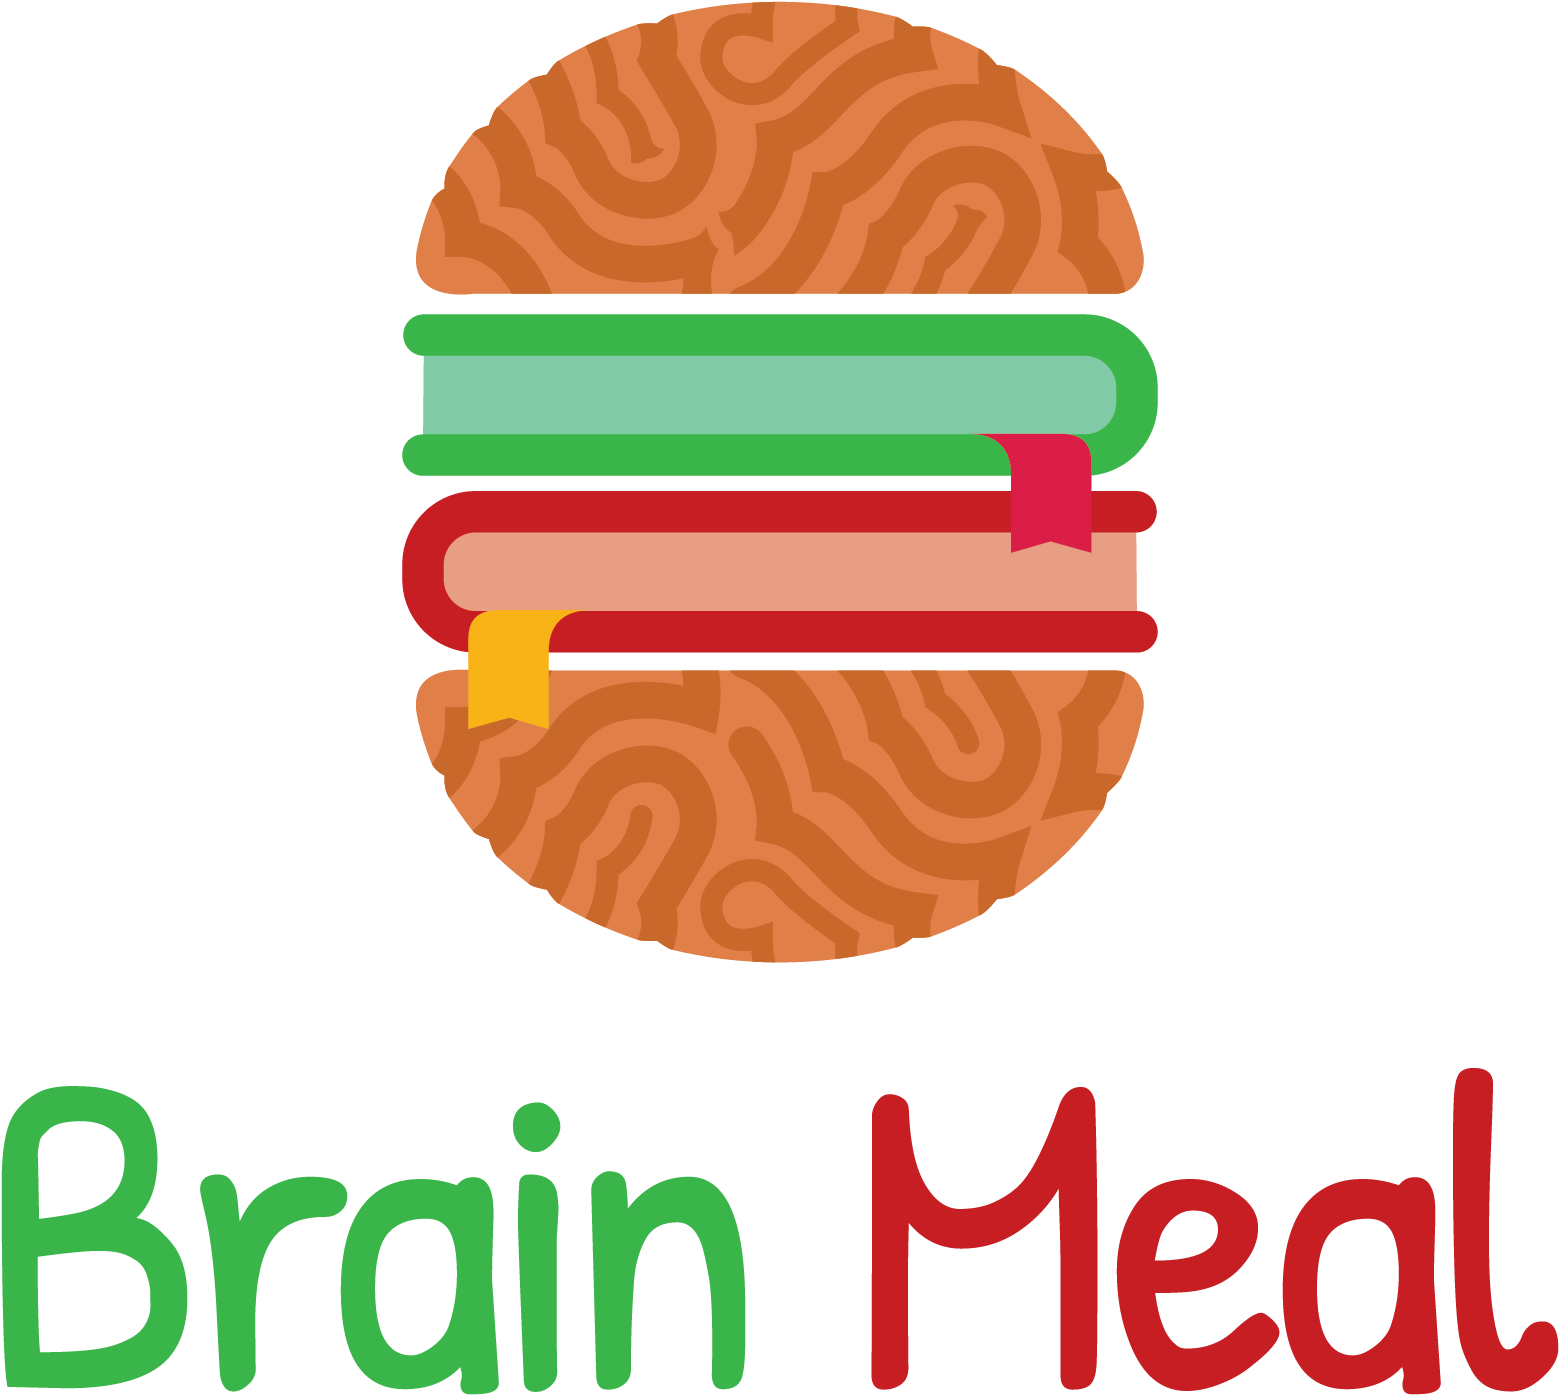 Comic Logo Featuring A Brain And Between Two Books - Dessert (2000x2000)